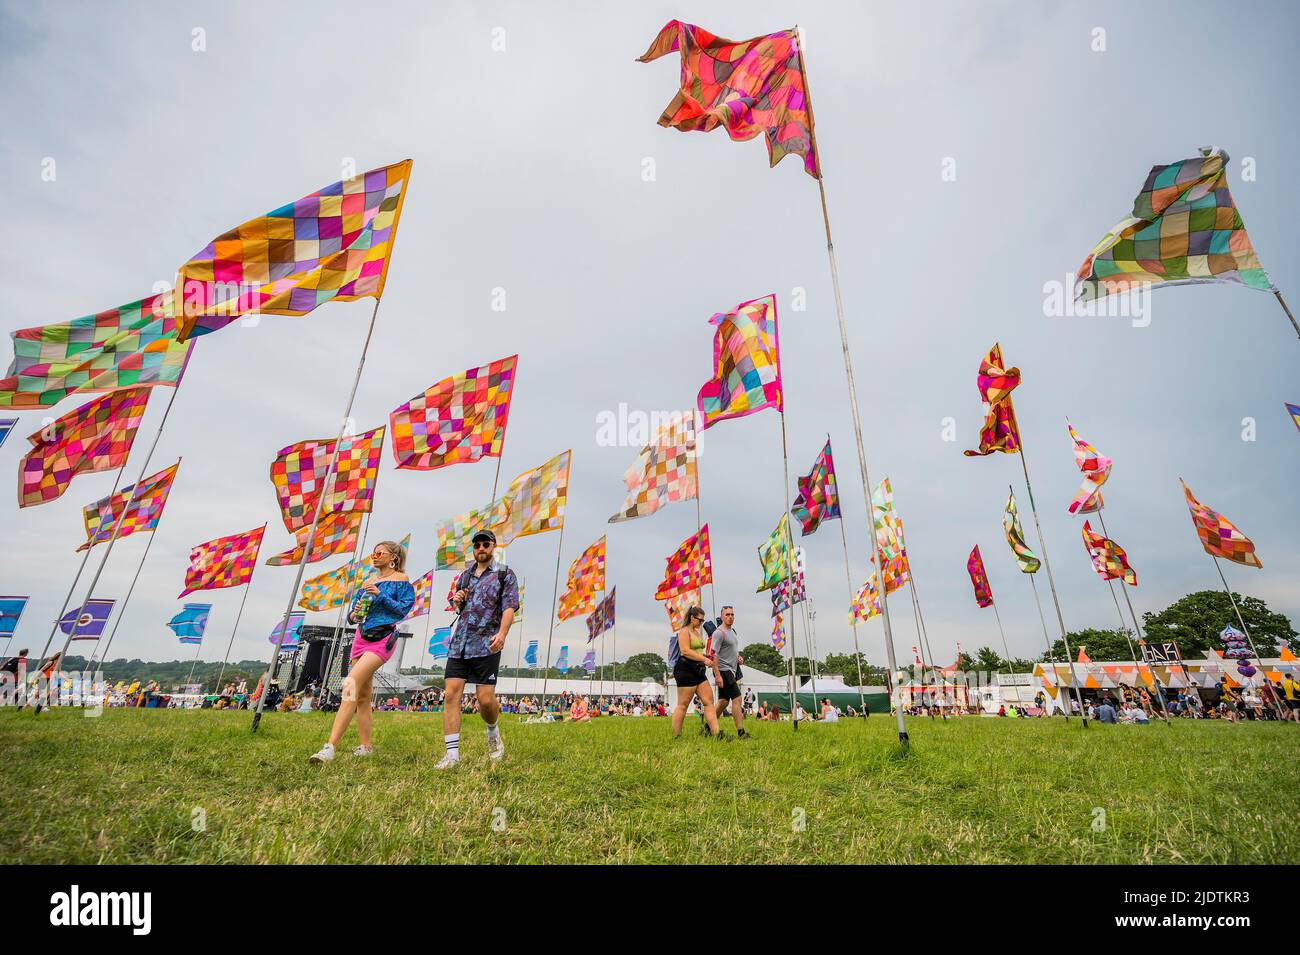 Glastonbury, UK. 23rd June, 2022. Passing through the sea of flags at the Glade - The 50th 2022 Glastonbury Festival, Worthy Farm. Glastonbury, Credit: Guy Bell/Alamy Live News Stock Photo